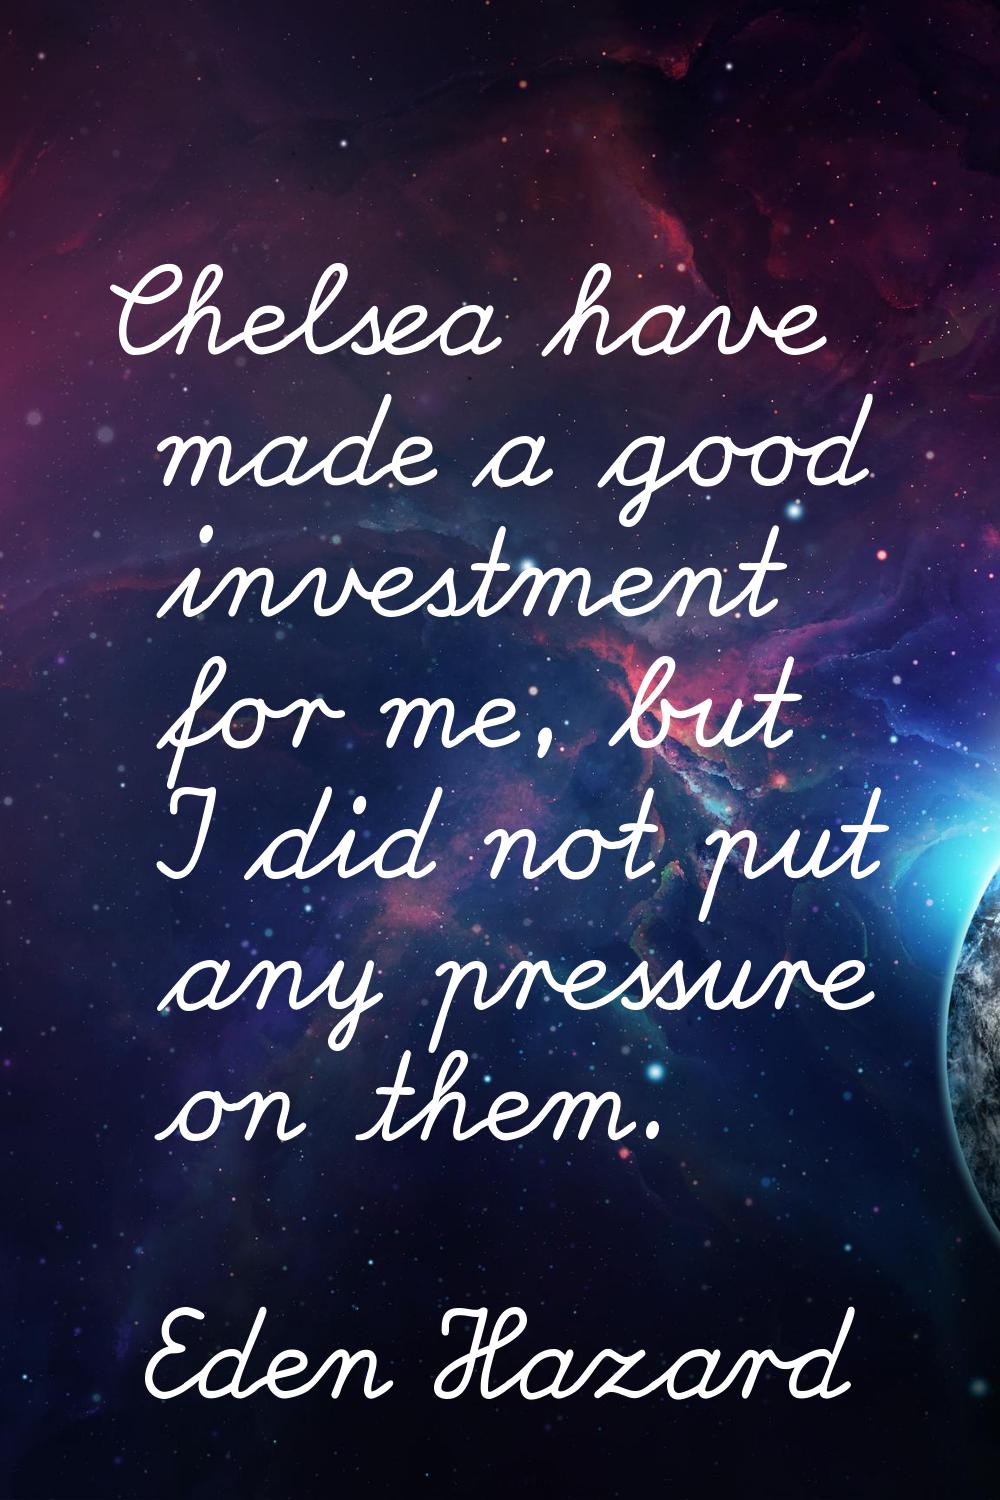 Chelsea have made a good investment for me, but I did not put any pressure on them.